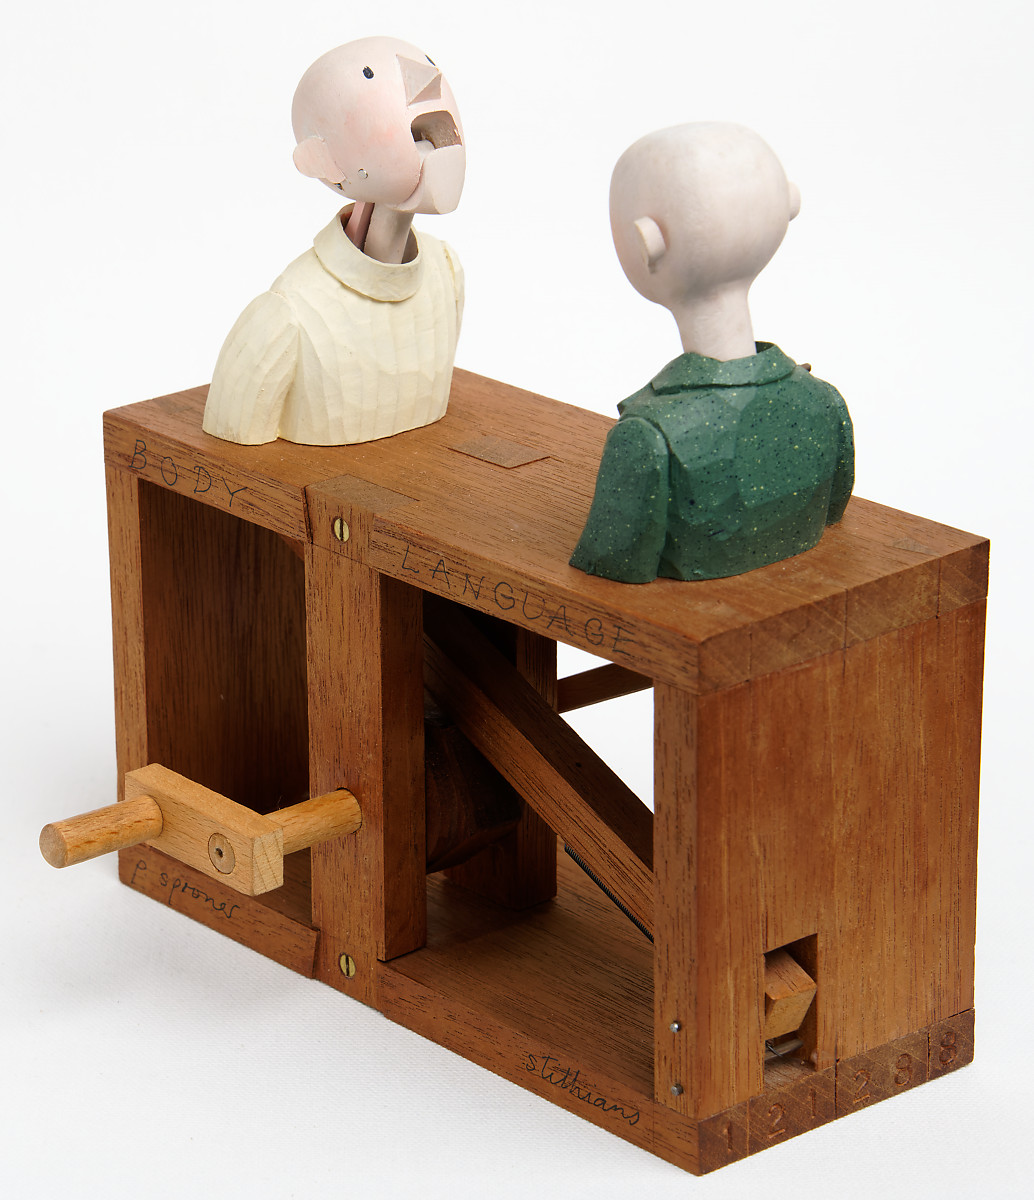 Carved painted wooden automata. 2 bald men are in conversation. One speaks and the other nods.